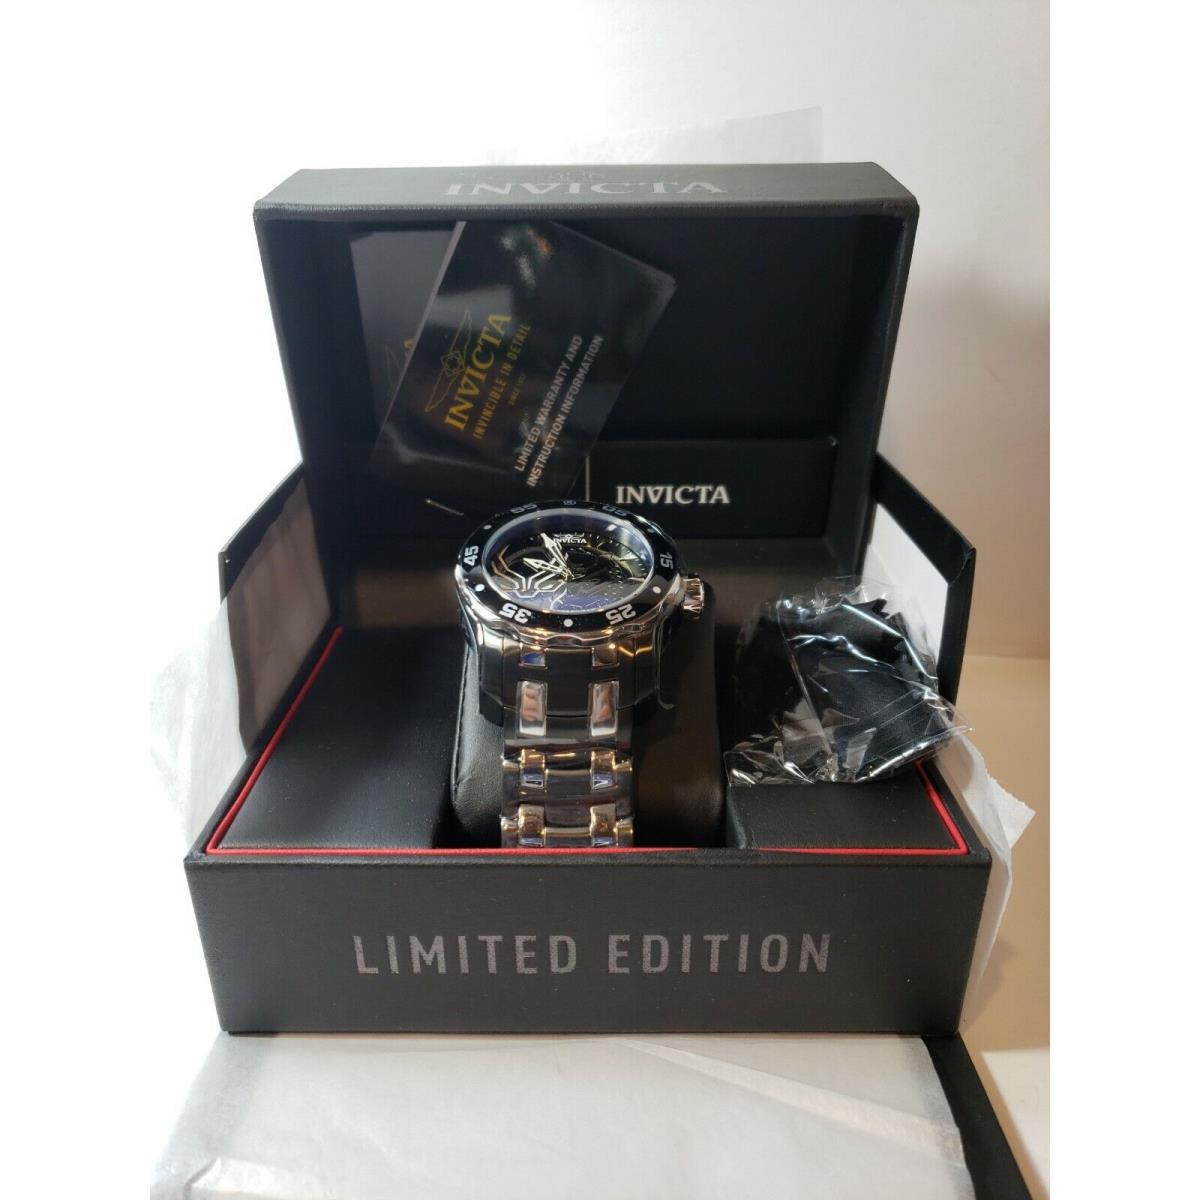 Invicta watch Black Panther - Black Dial, Black Band